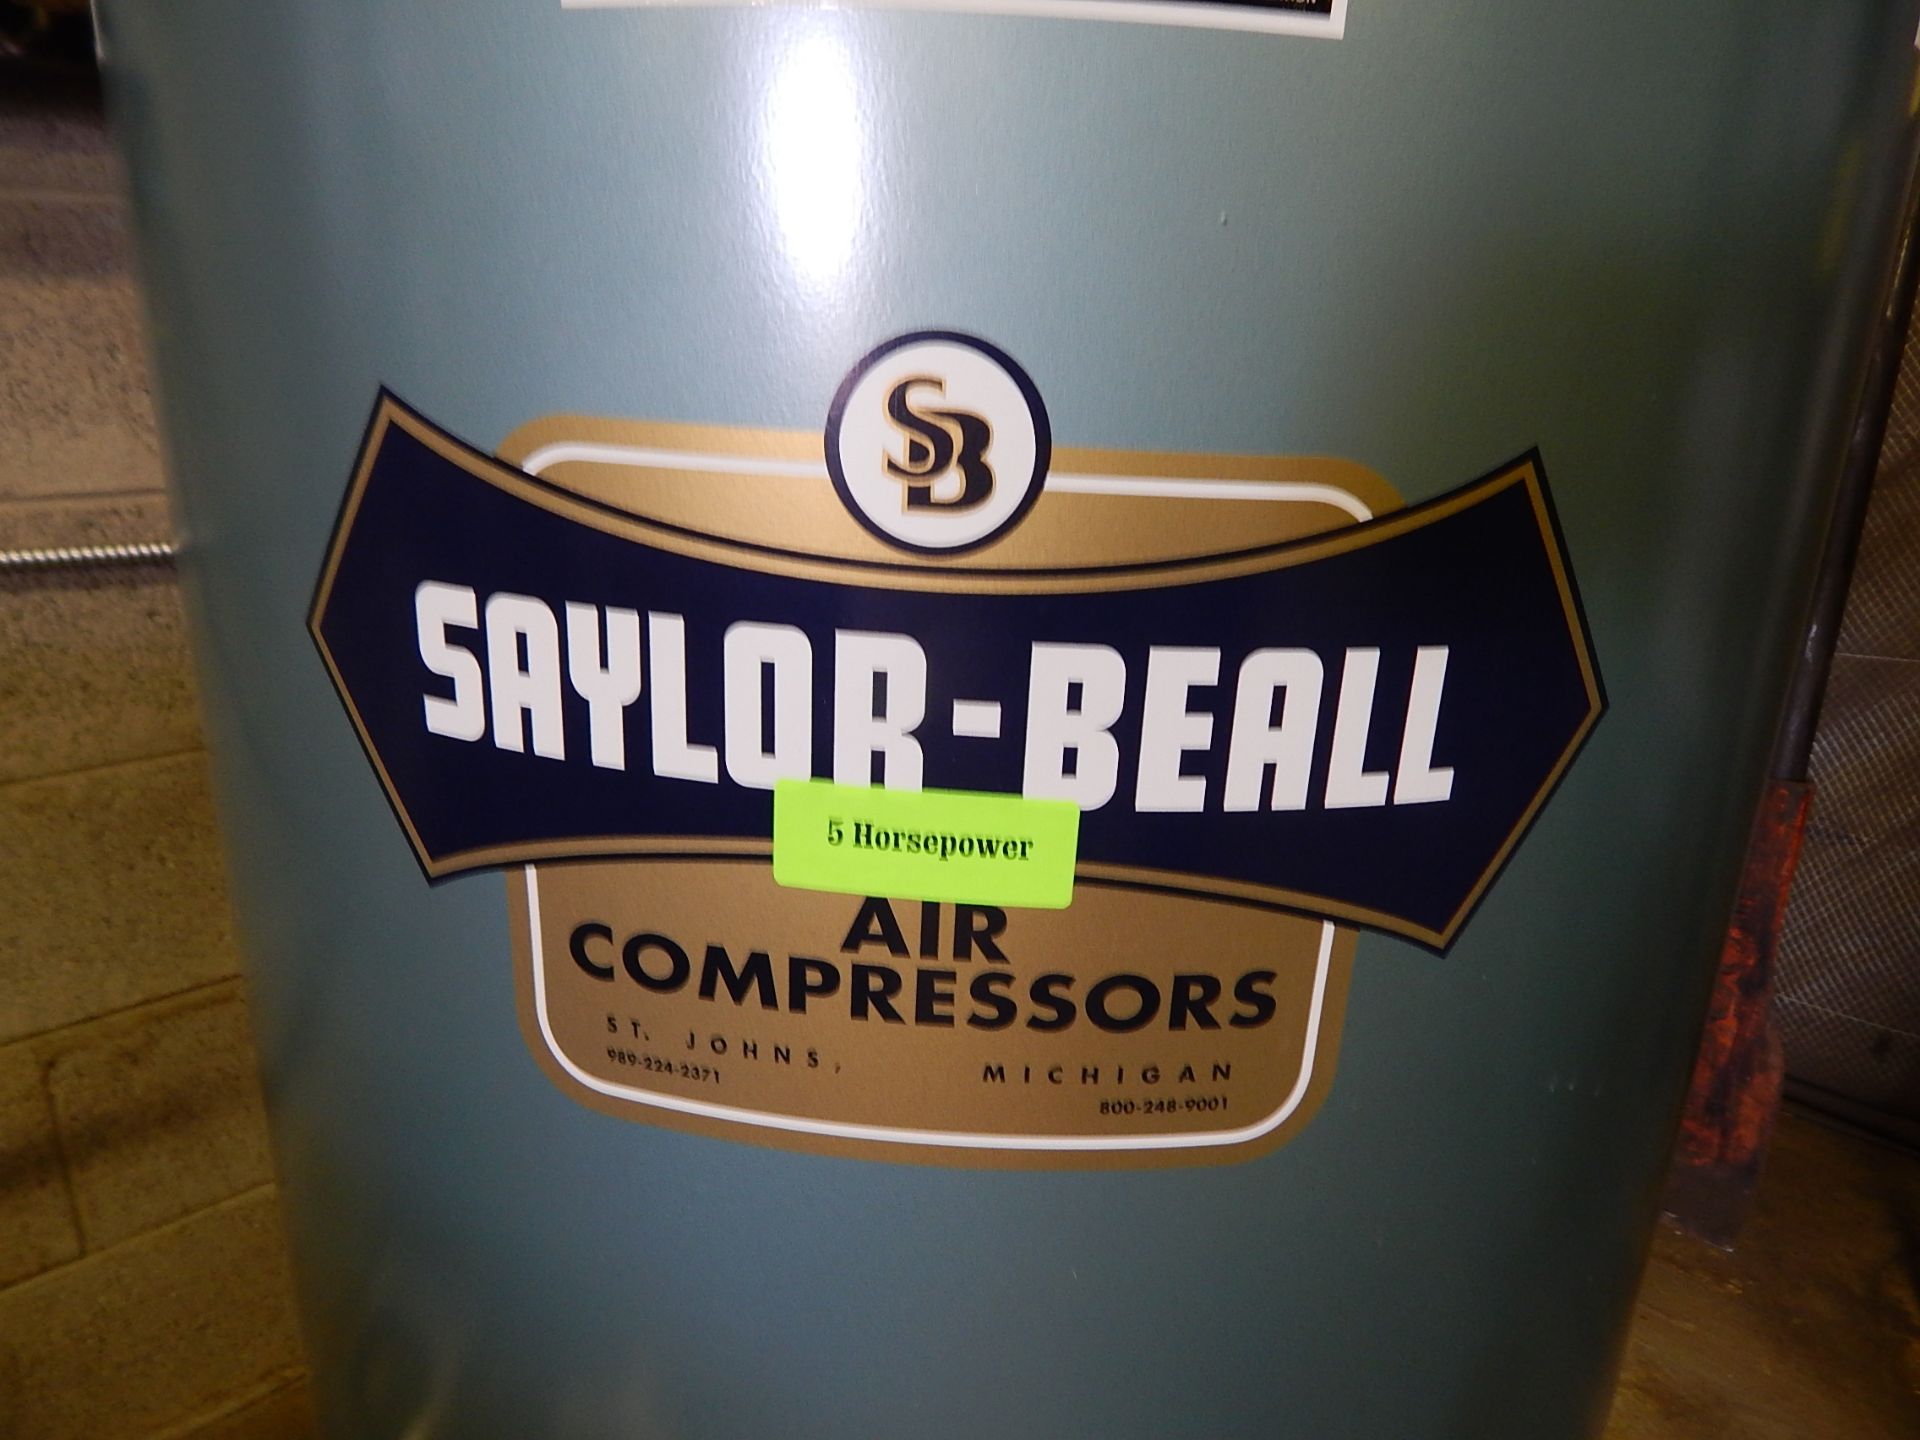 Saylor-Beall 5 HP Tank-Mounted Vertical Air Compressor, SN 5-41-A16, 80 Gal. Tank, 3 Phase - Image 6 of 7